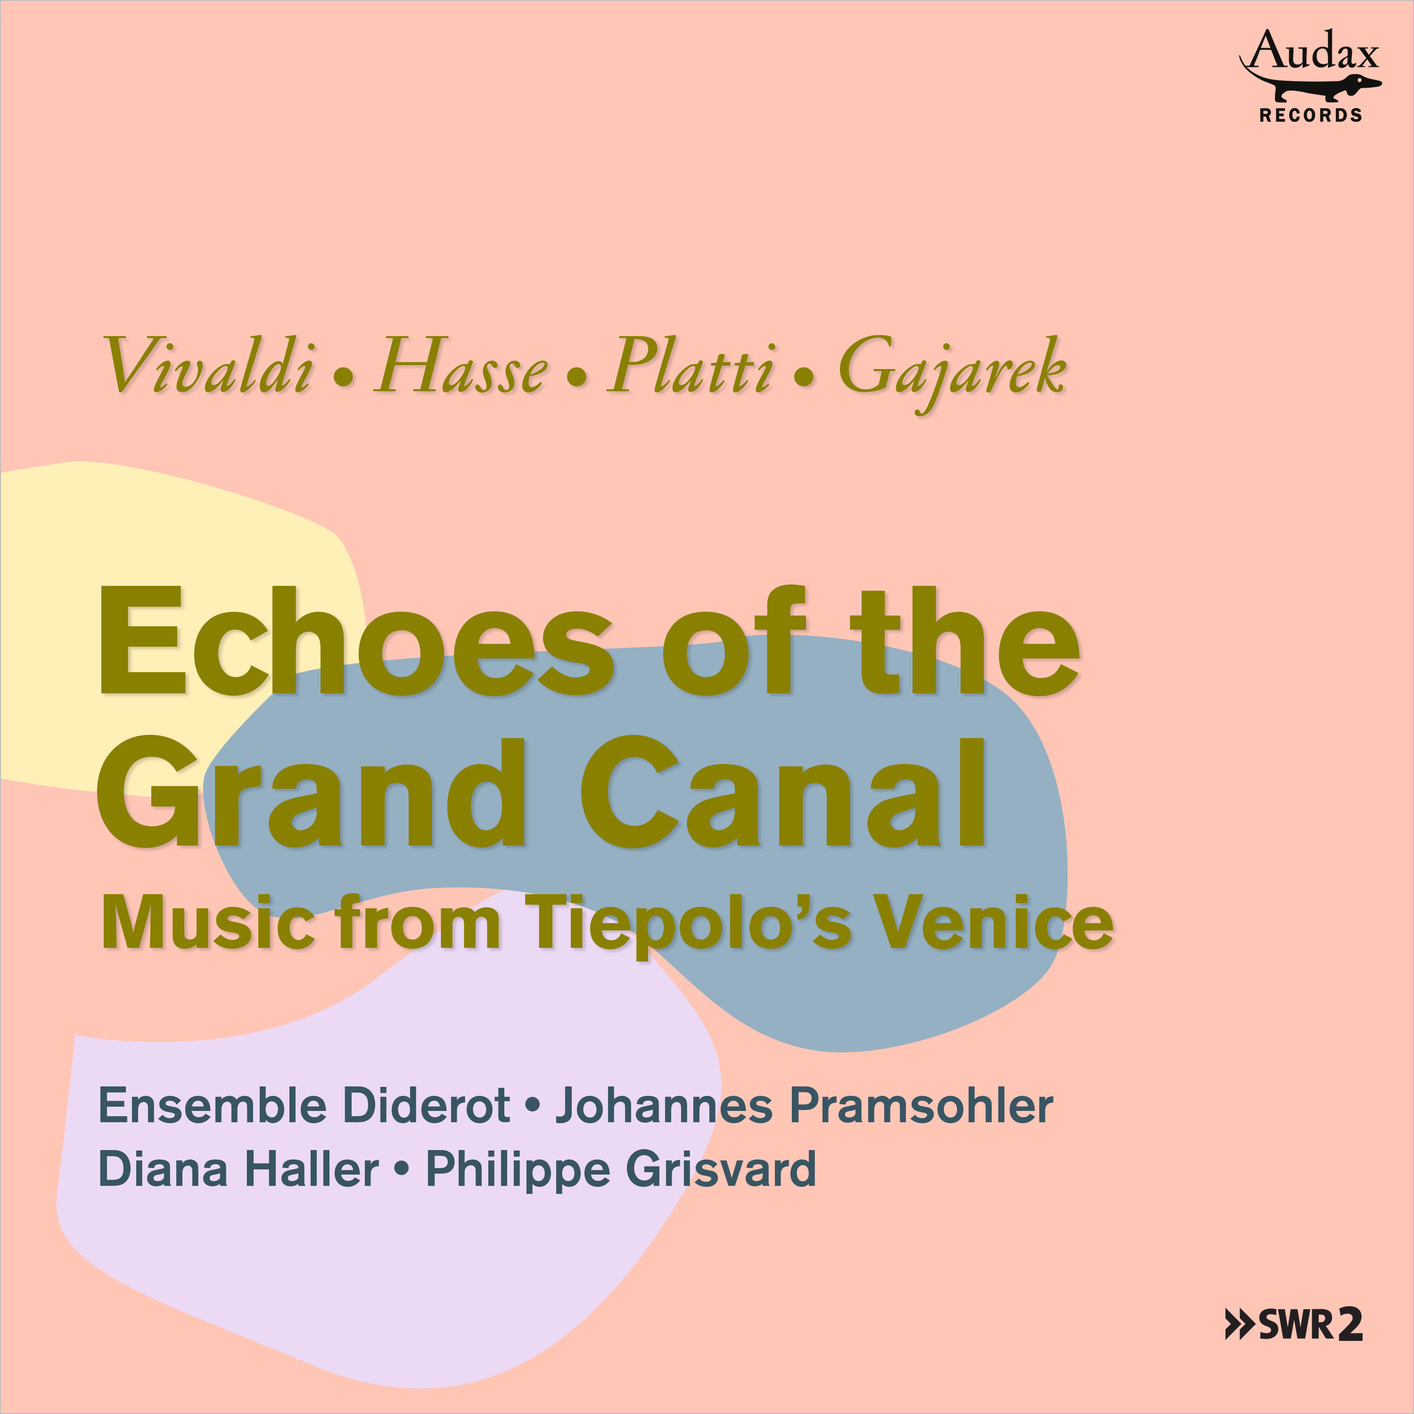 Ensemble Diderot & Johannes Pramsohler - Echoes of the Grand Canal (2019) [FLAC 24bit/48kHz]